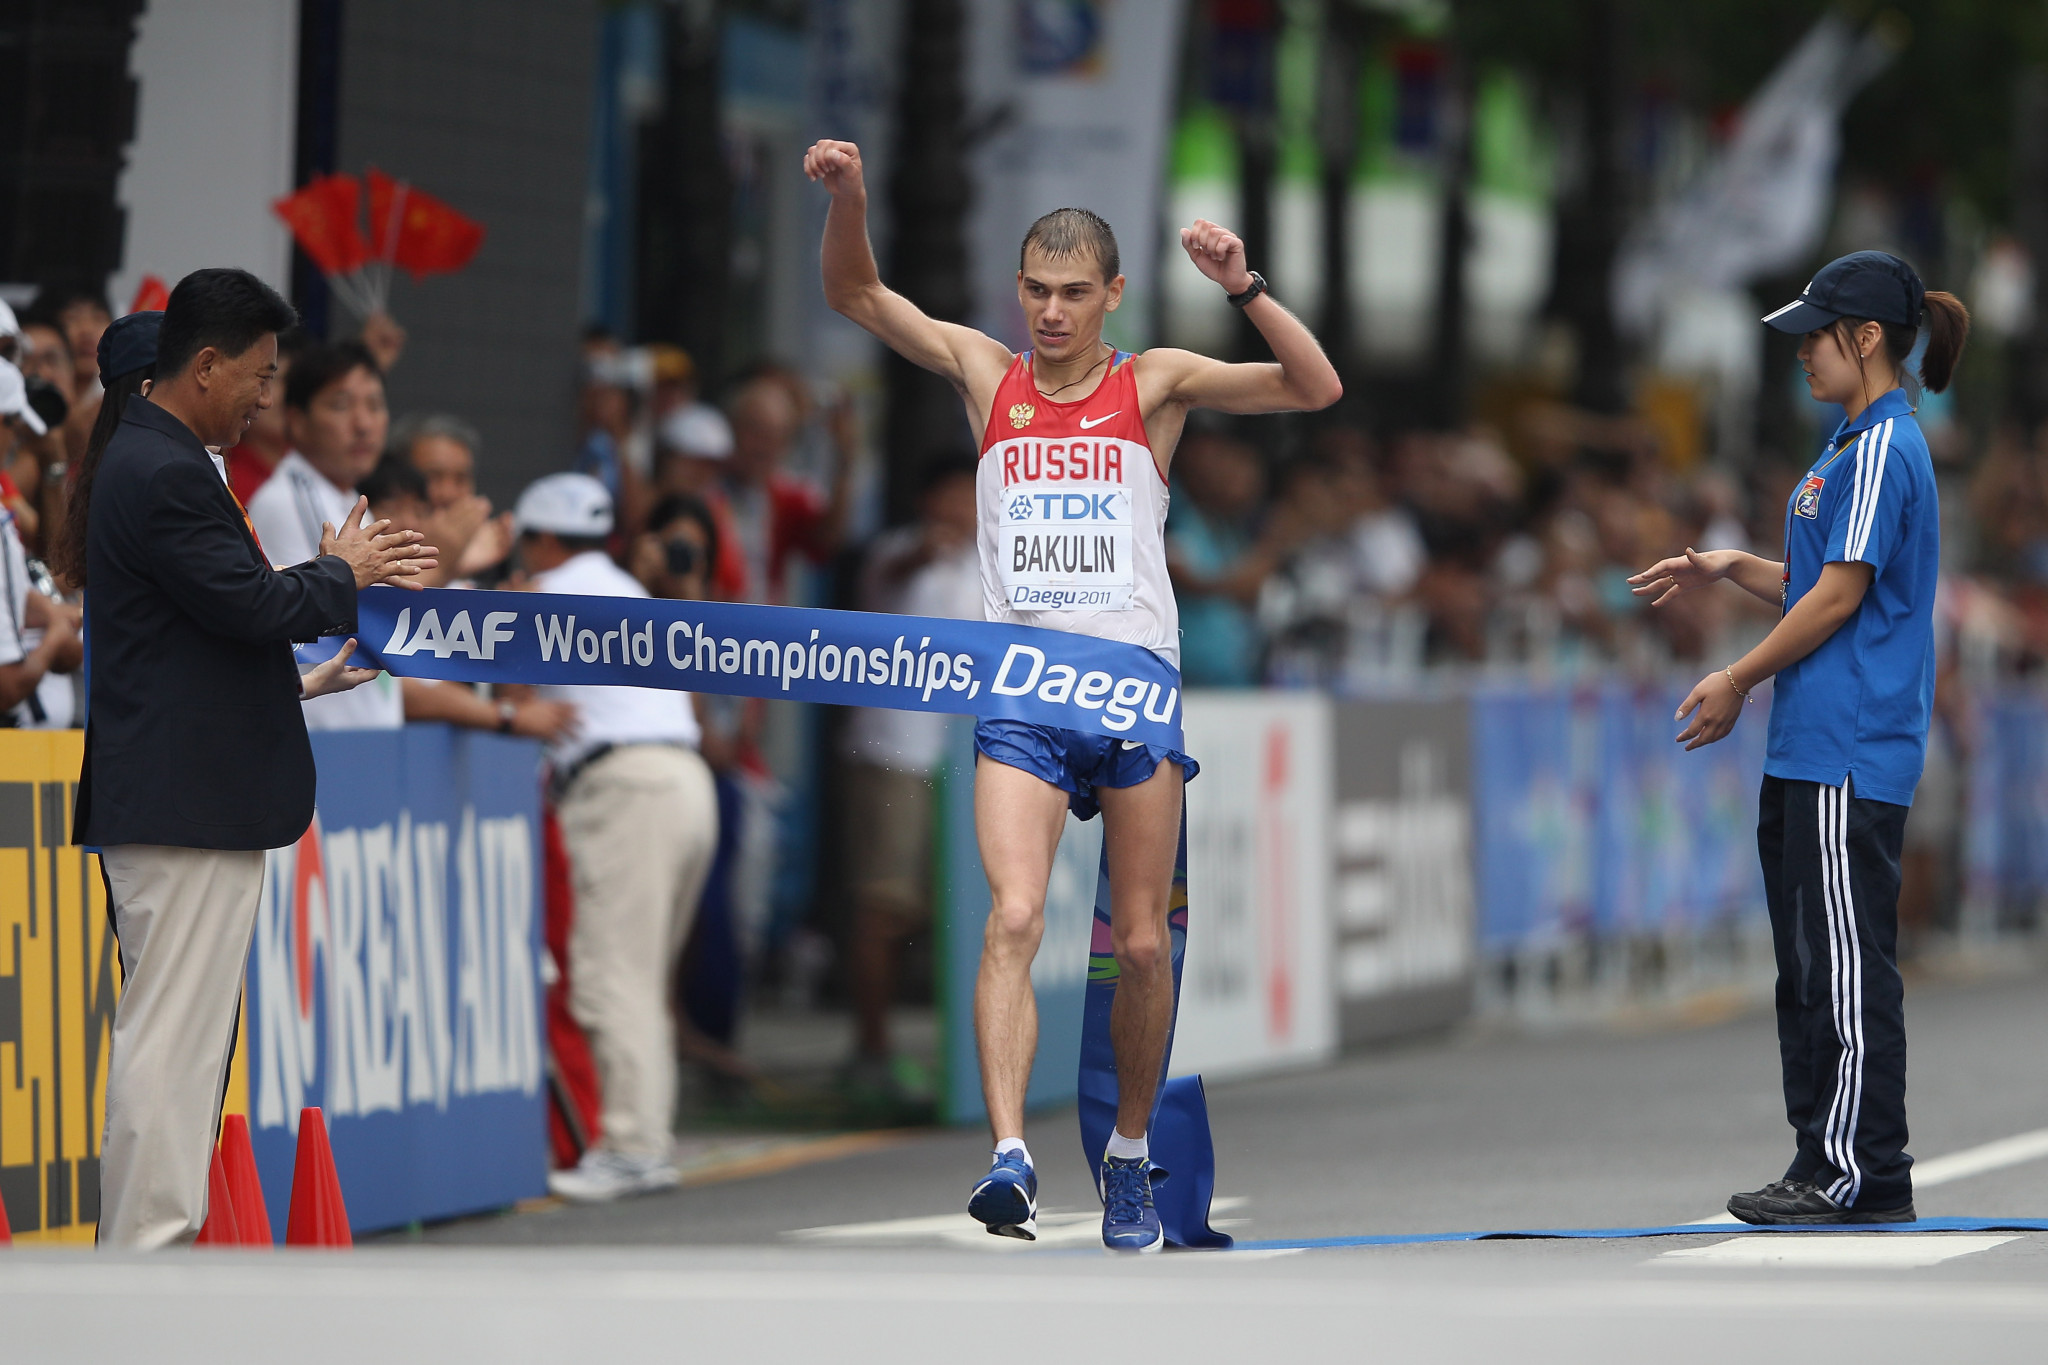 Russian former world race walk champion Bakulin earns second doping suspension from AIU 